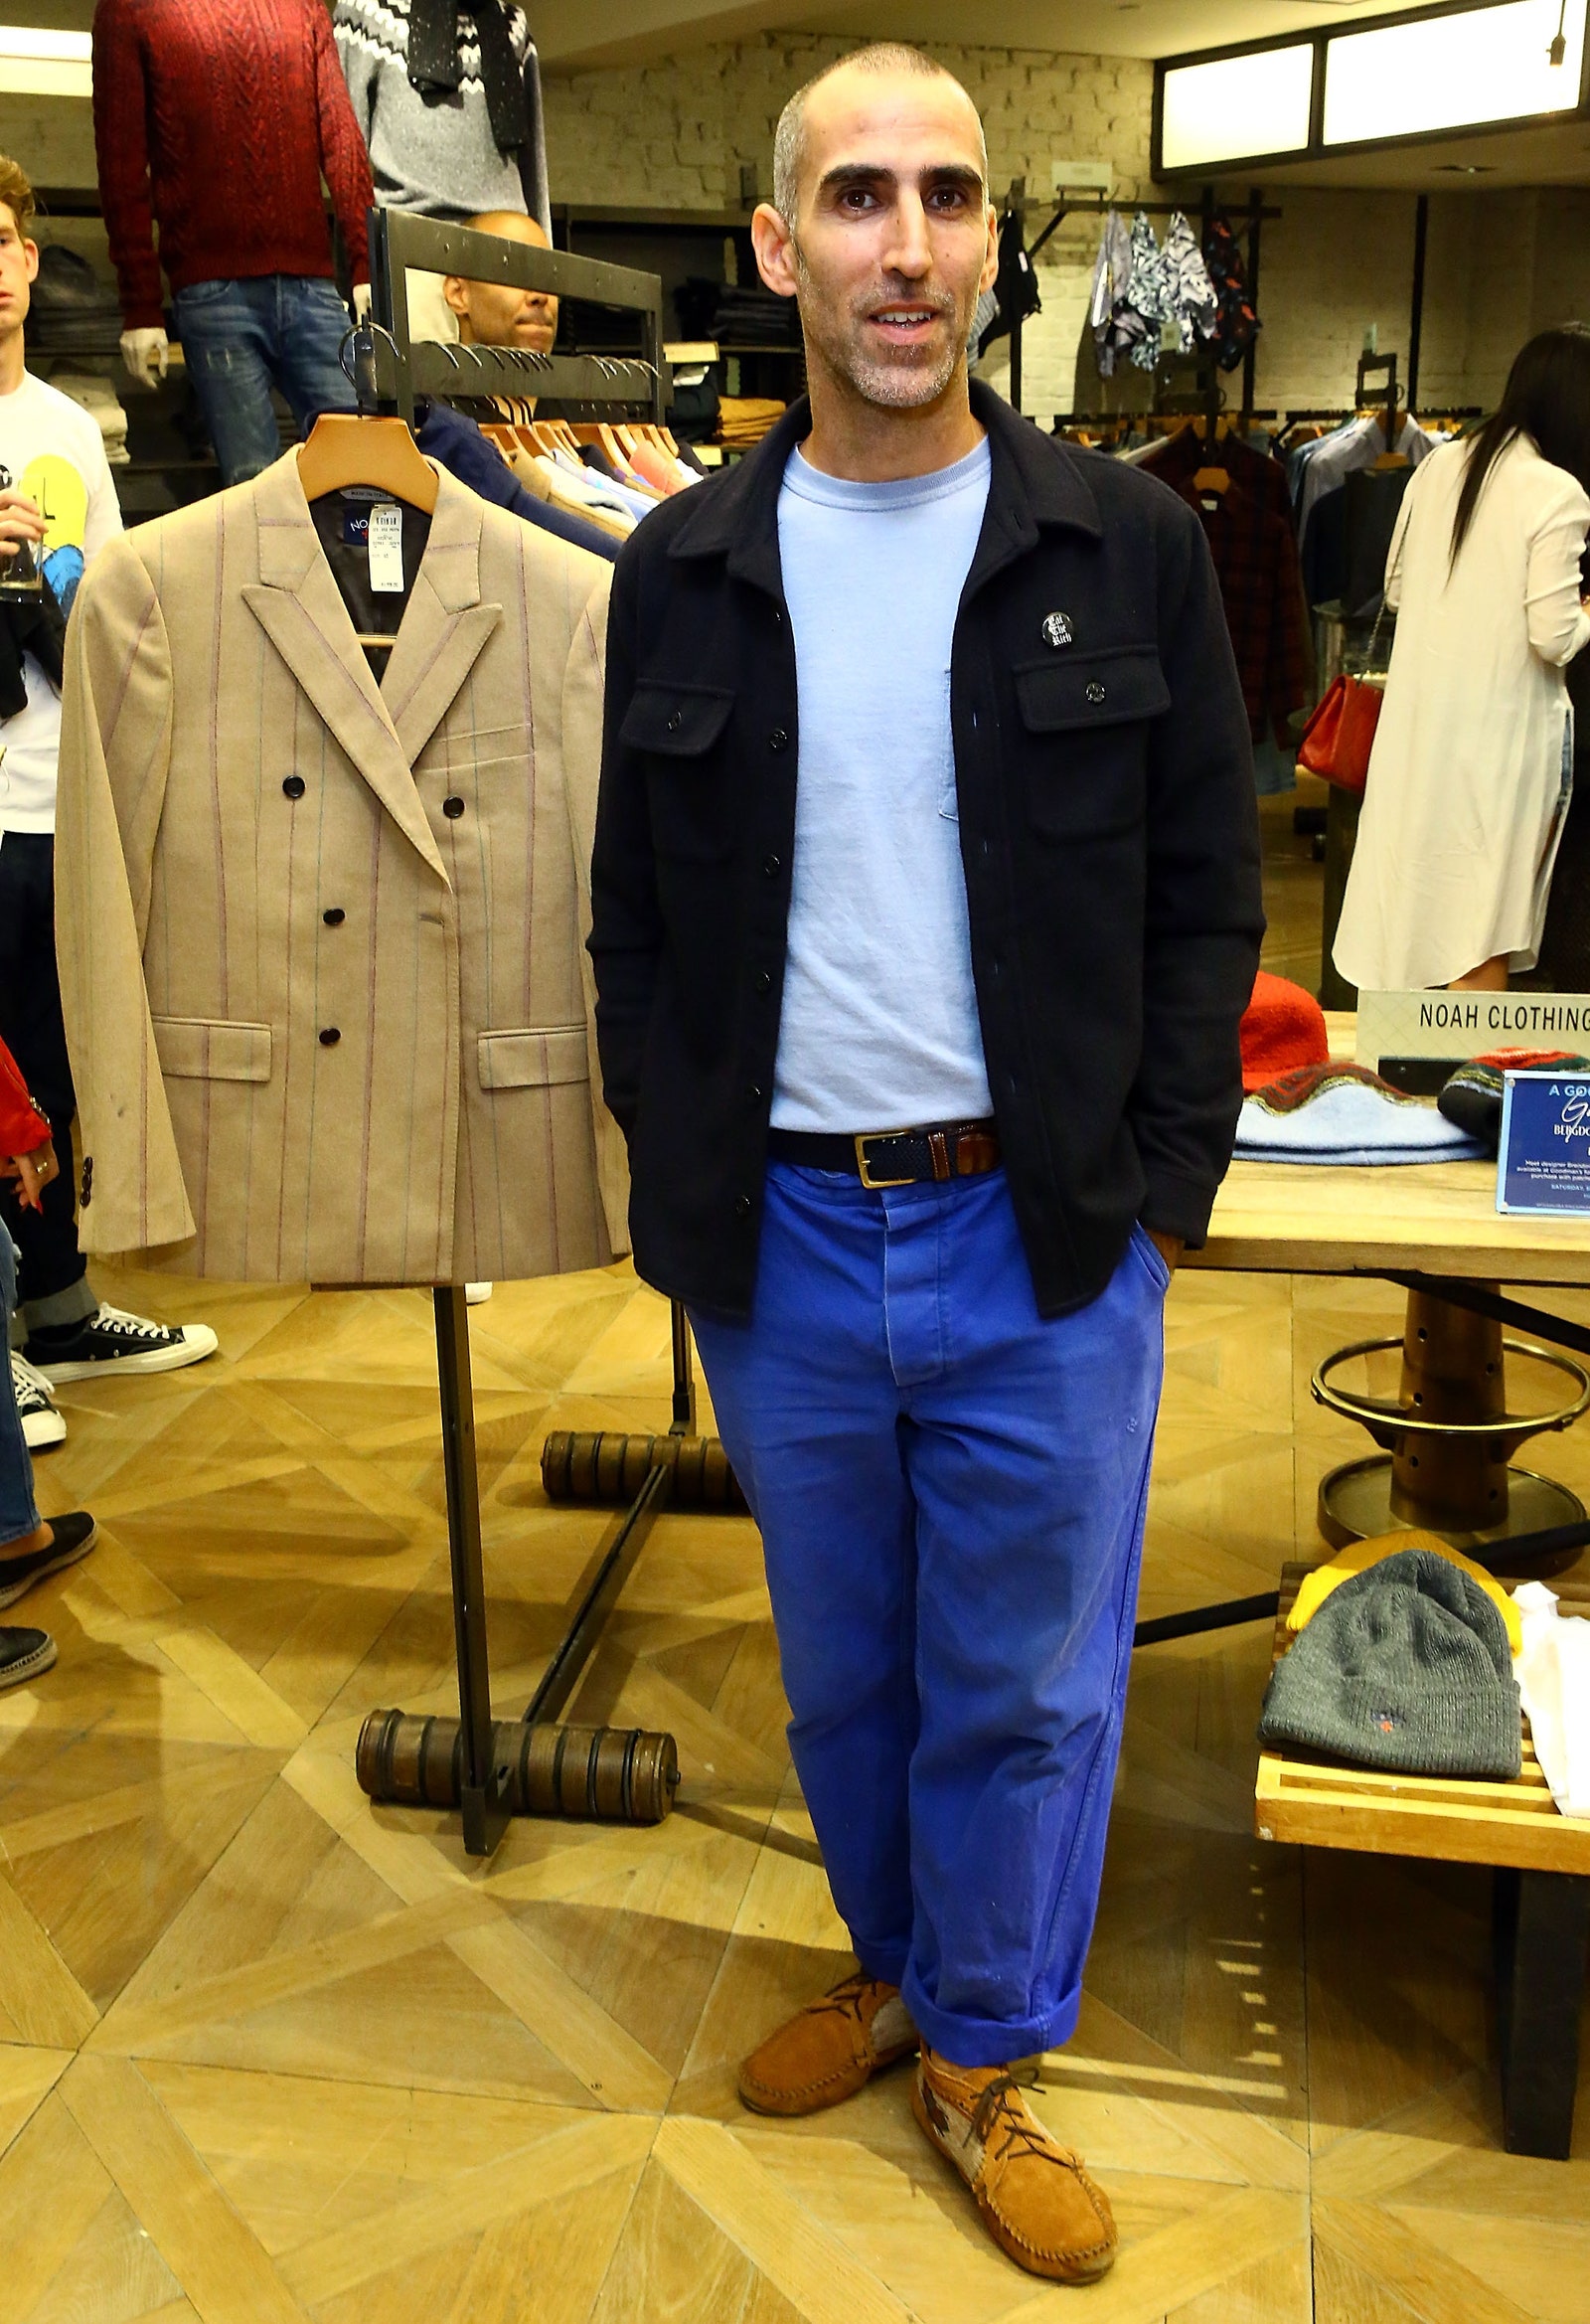 NEW YORK NY SEPTEMBER 19 Noah clothing fashion designer Brendon Babenzien attends 'A Good Time At Goodman's' held at...